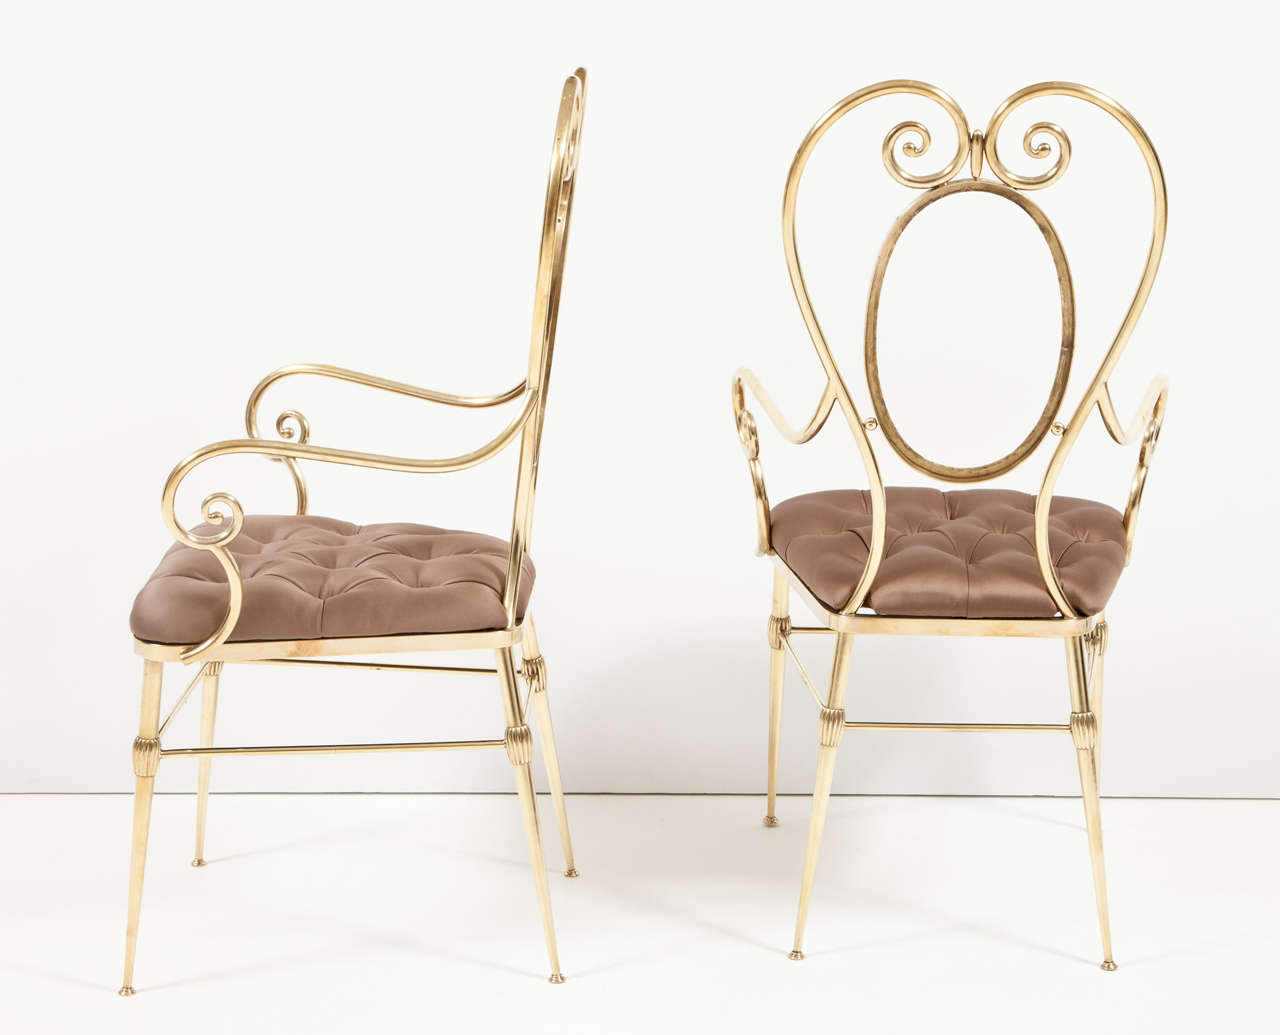 Chairs, Pair of Brass Chairs with Silk Upholstery, Mid-Century Design, Brass Leg For Sale 1